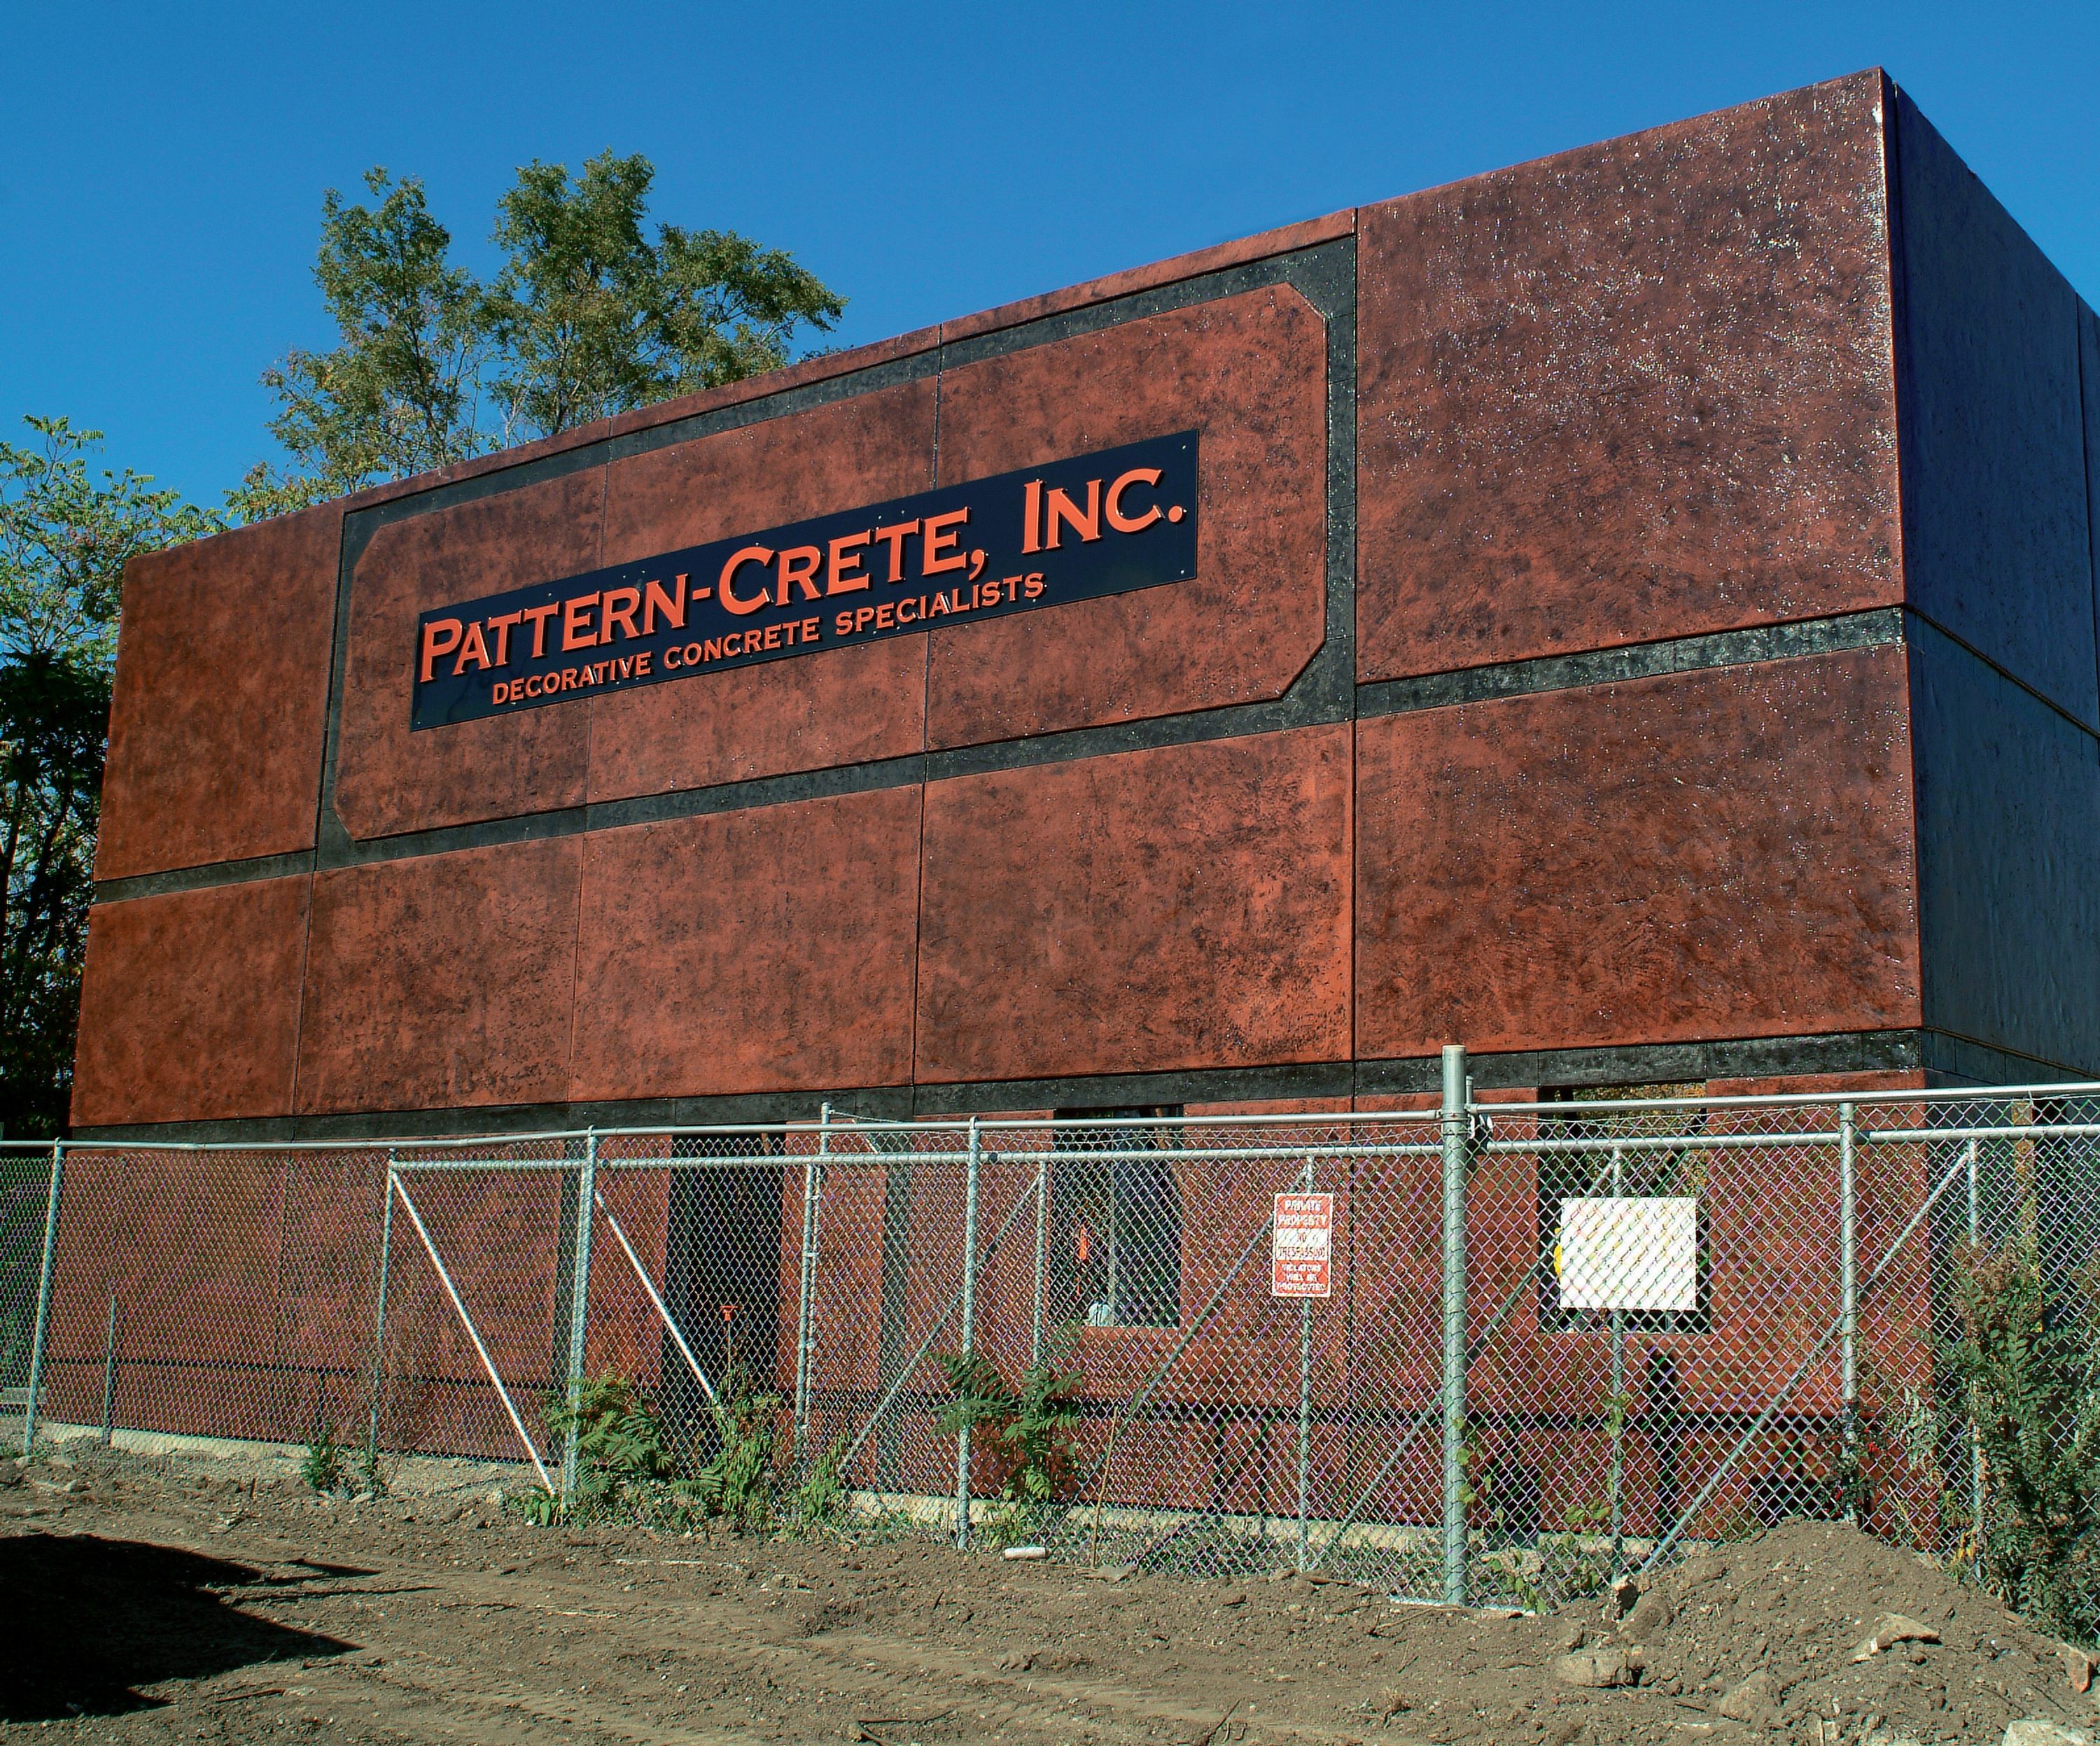 Pattern-Crete Warehouse and Shop - He wanted to use tilt-up construction, but didn't have the space to cast all the panels at once. That raised the question  would he be able to make the colors match with batches poured a month apart?